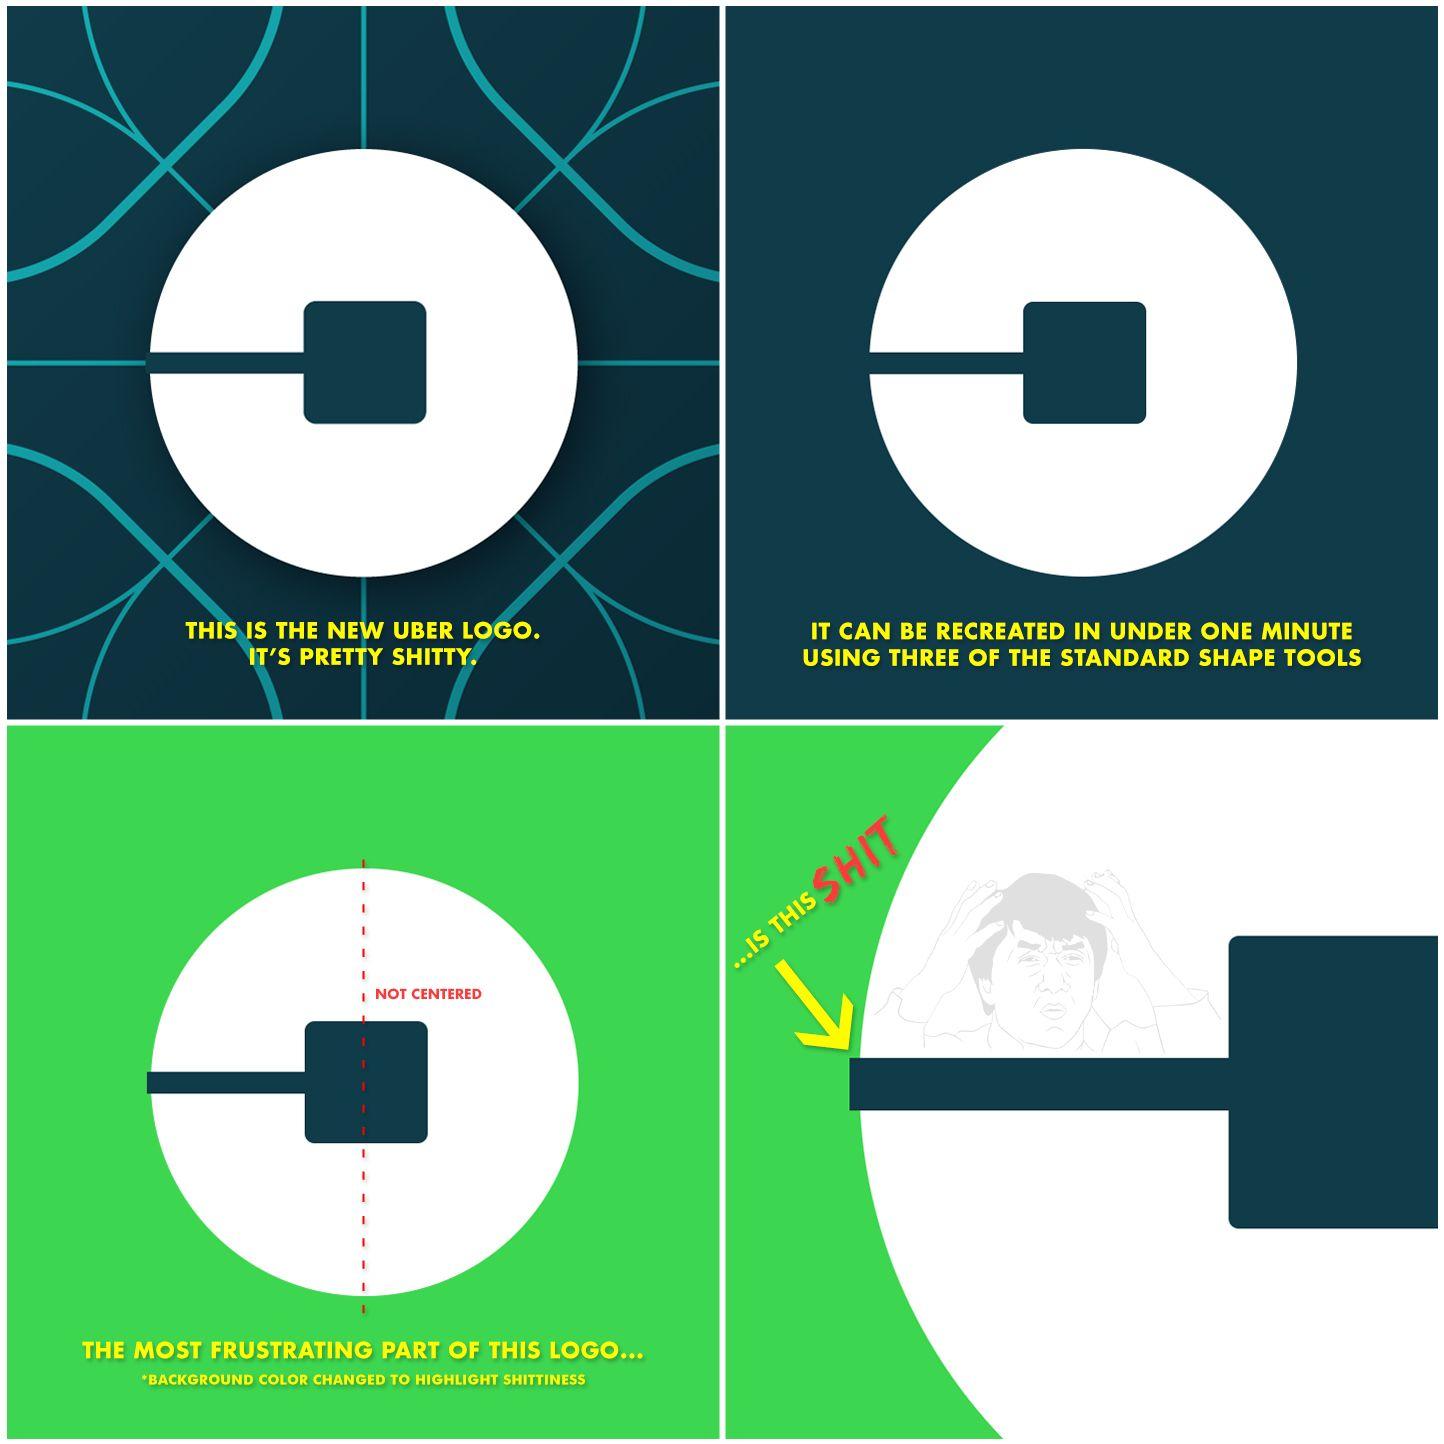 Uber App Logo - A close look at the new Uber logo reveals infuriatingly untidy